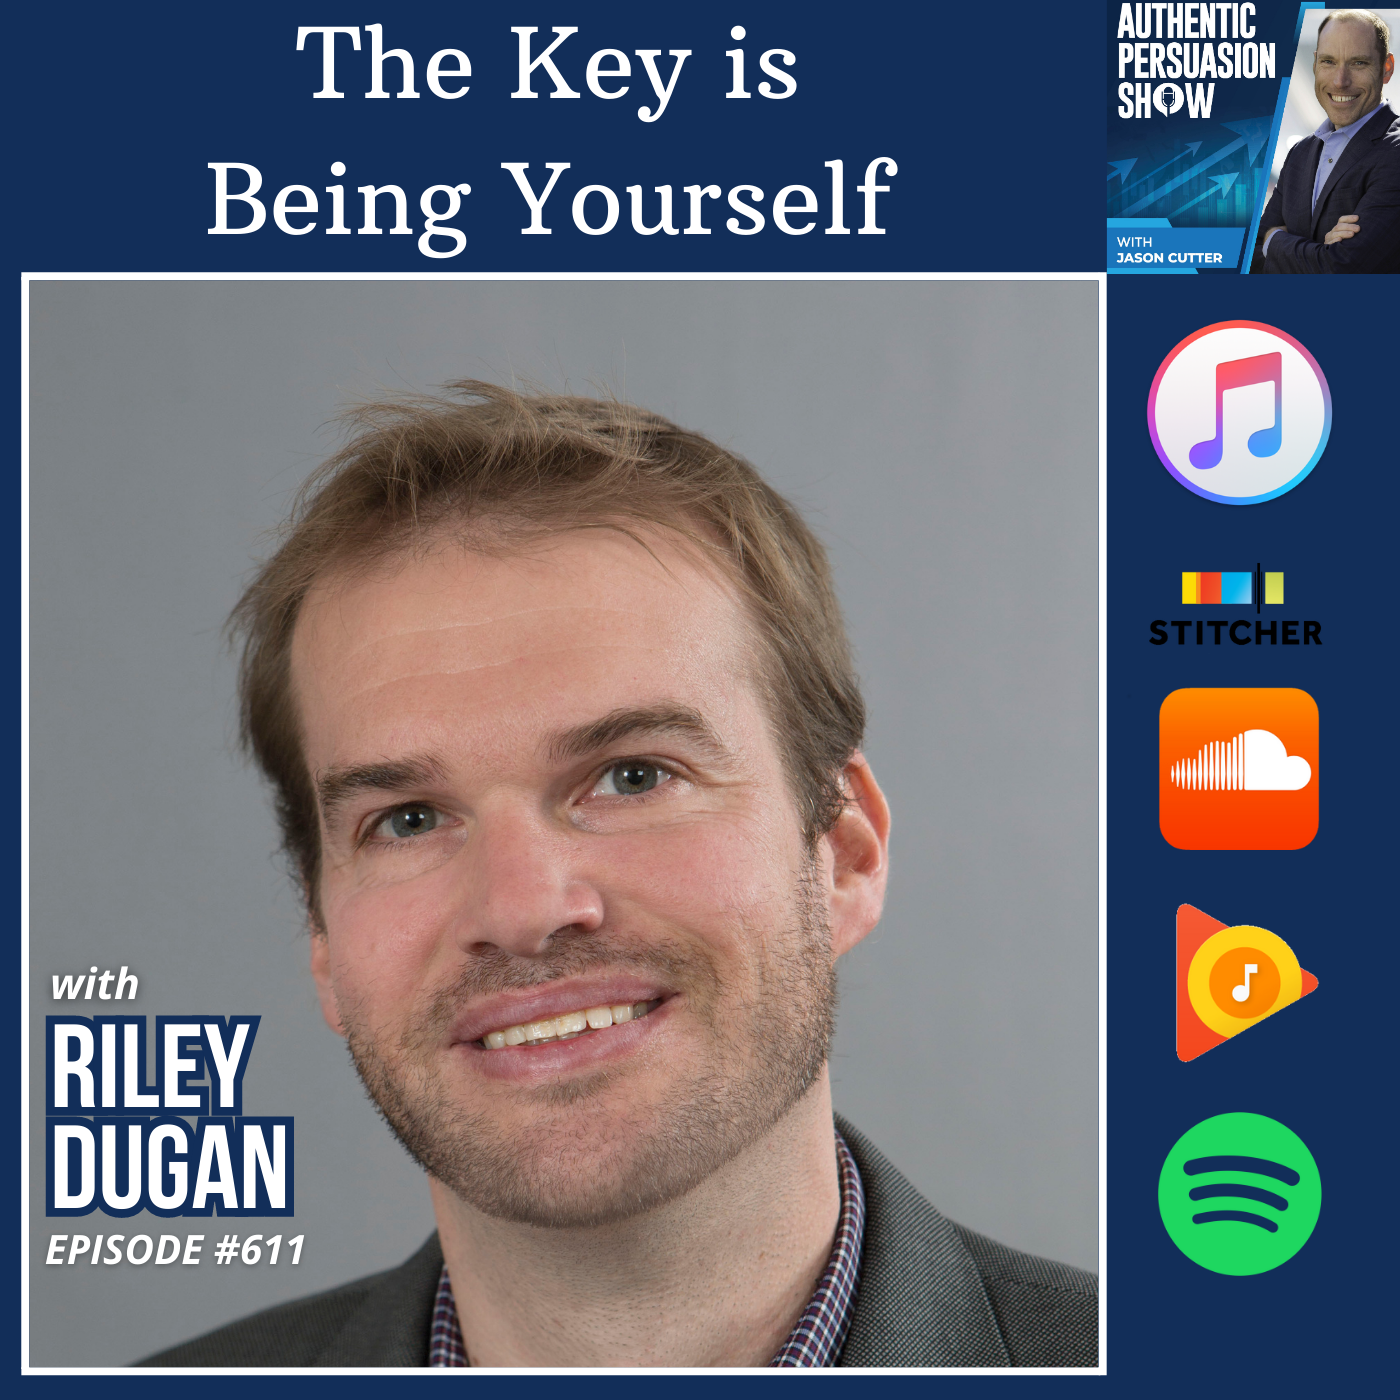 [611] The Key is Being Yourself, with Dr. Riley Dugan from the University of Dayton